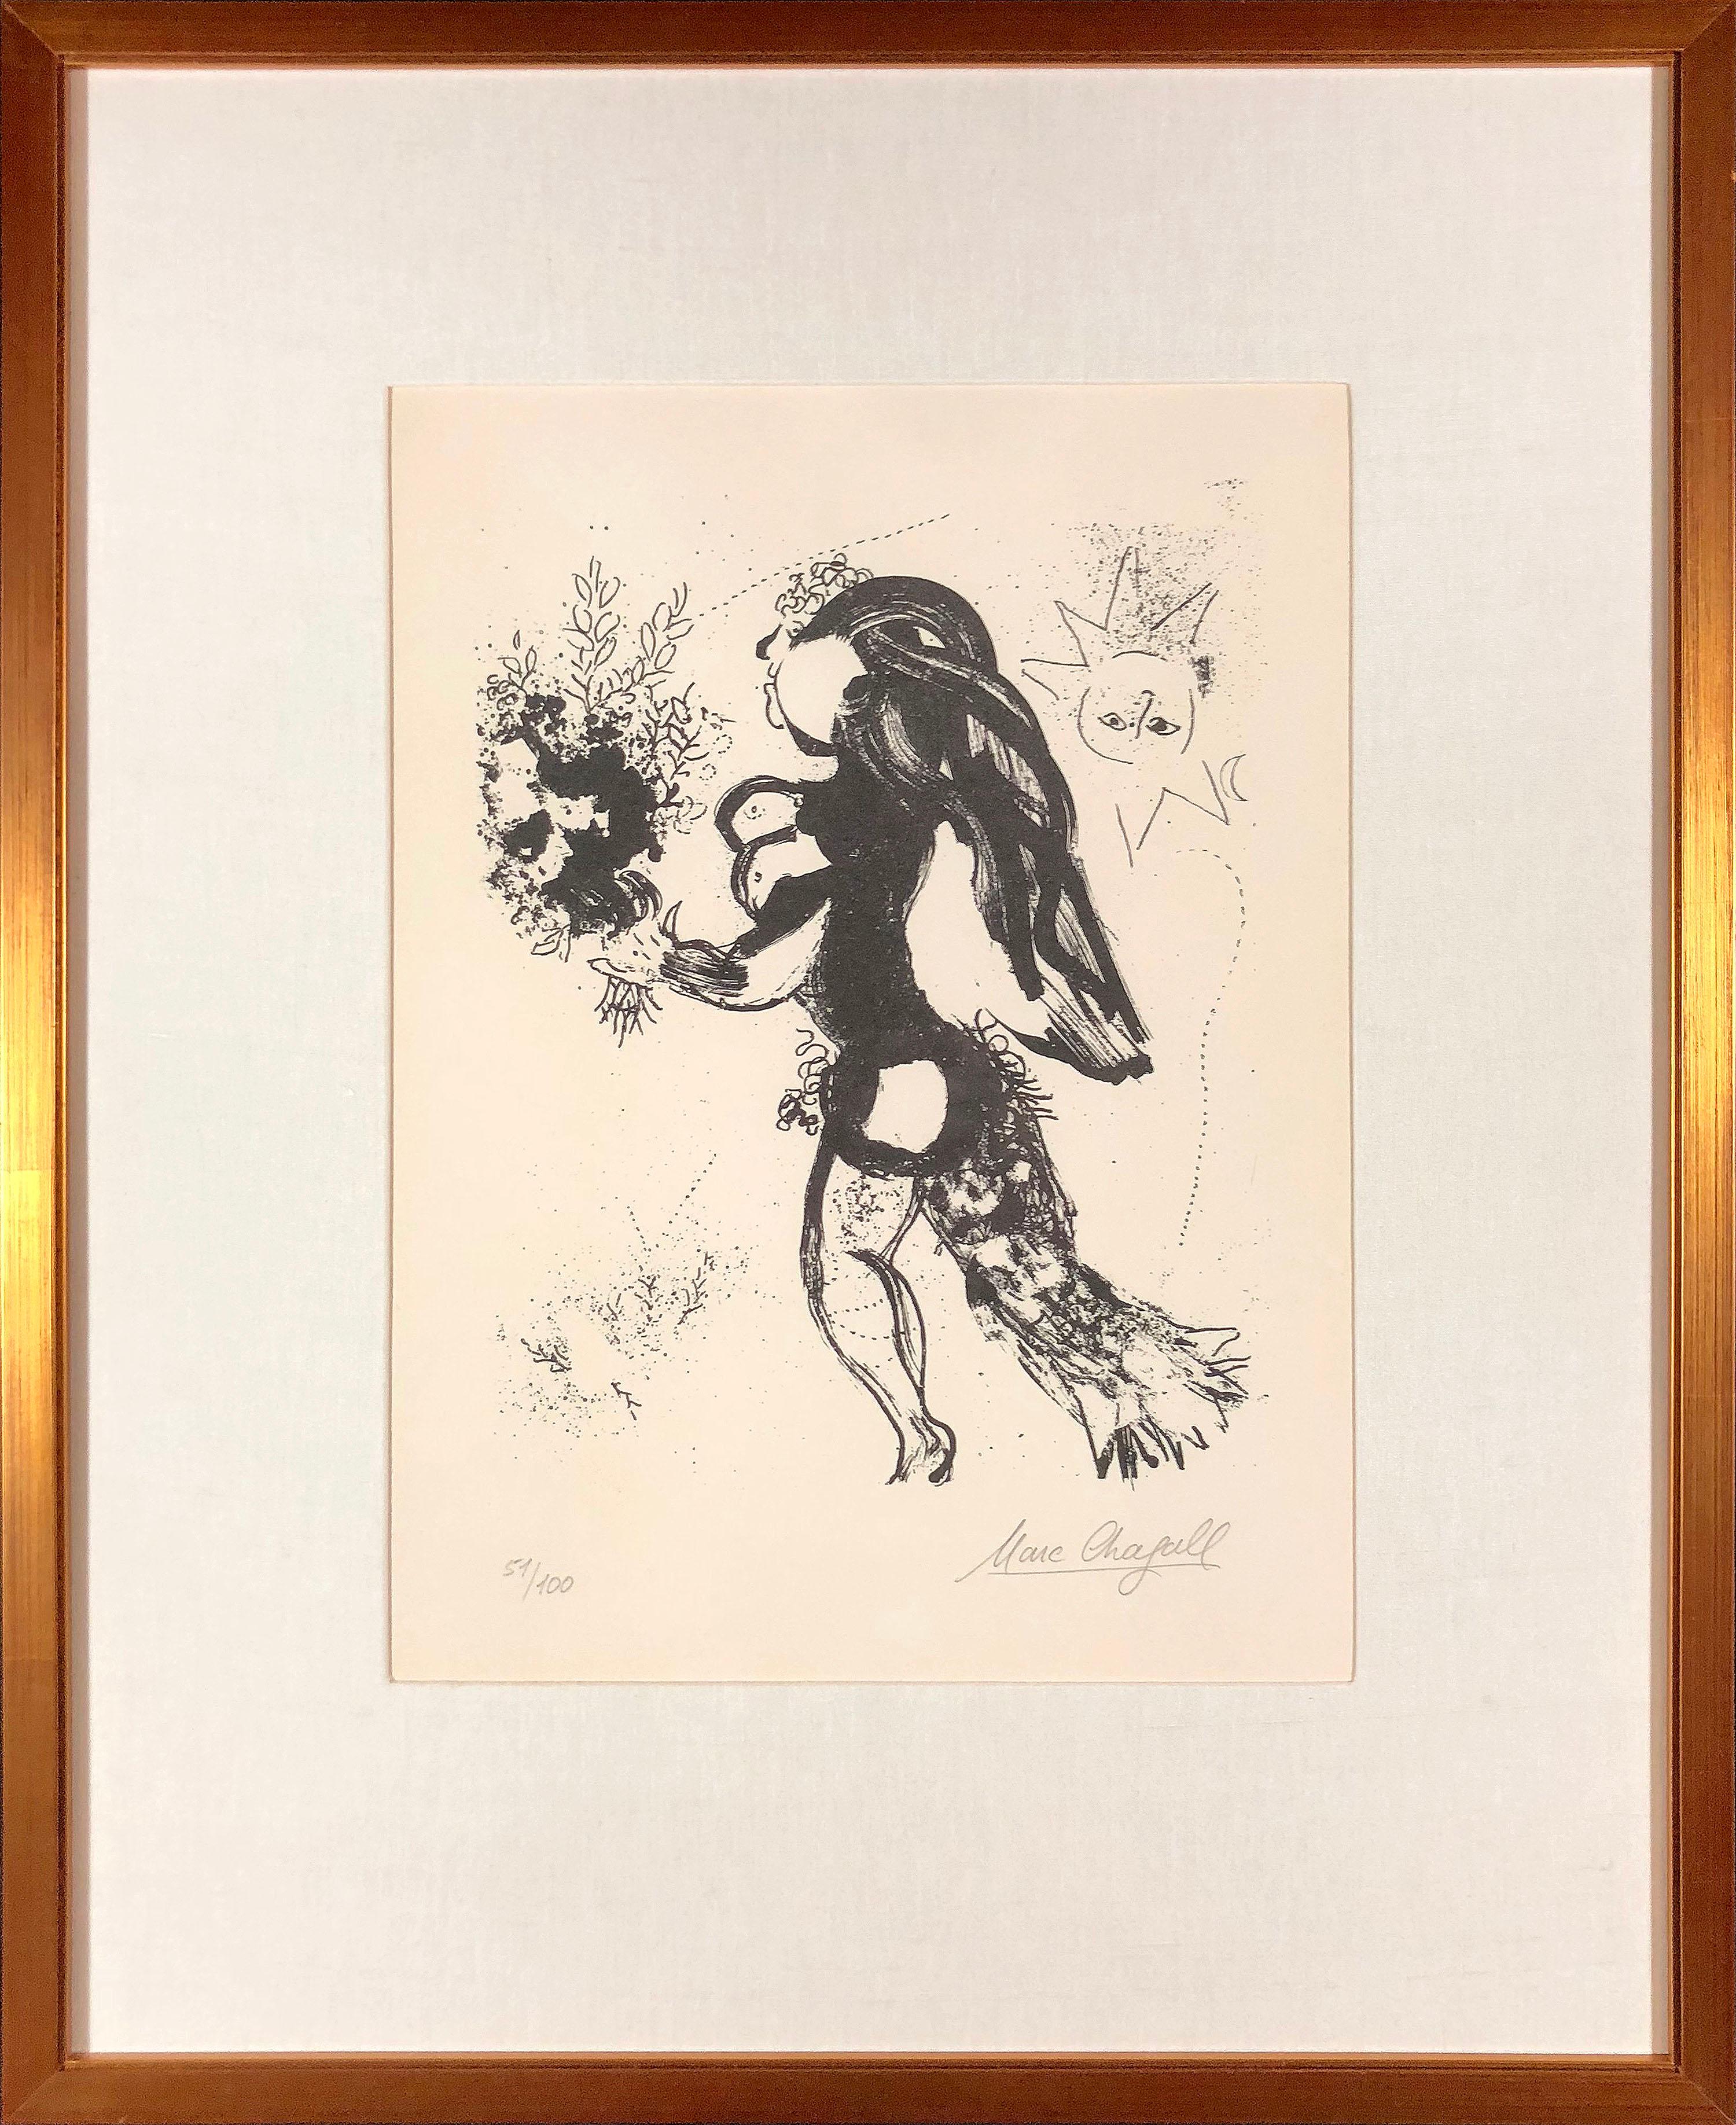 L'Offrande (Signed and Numbered) - Print by Marc Chagall